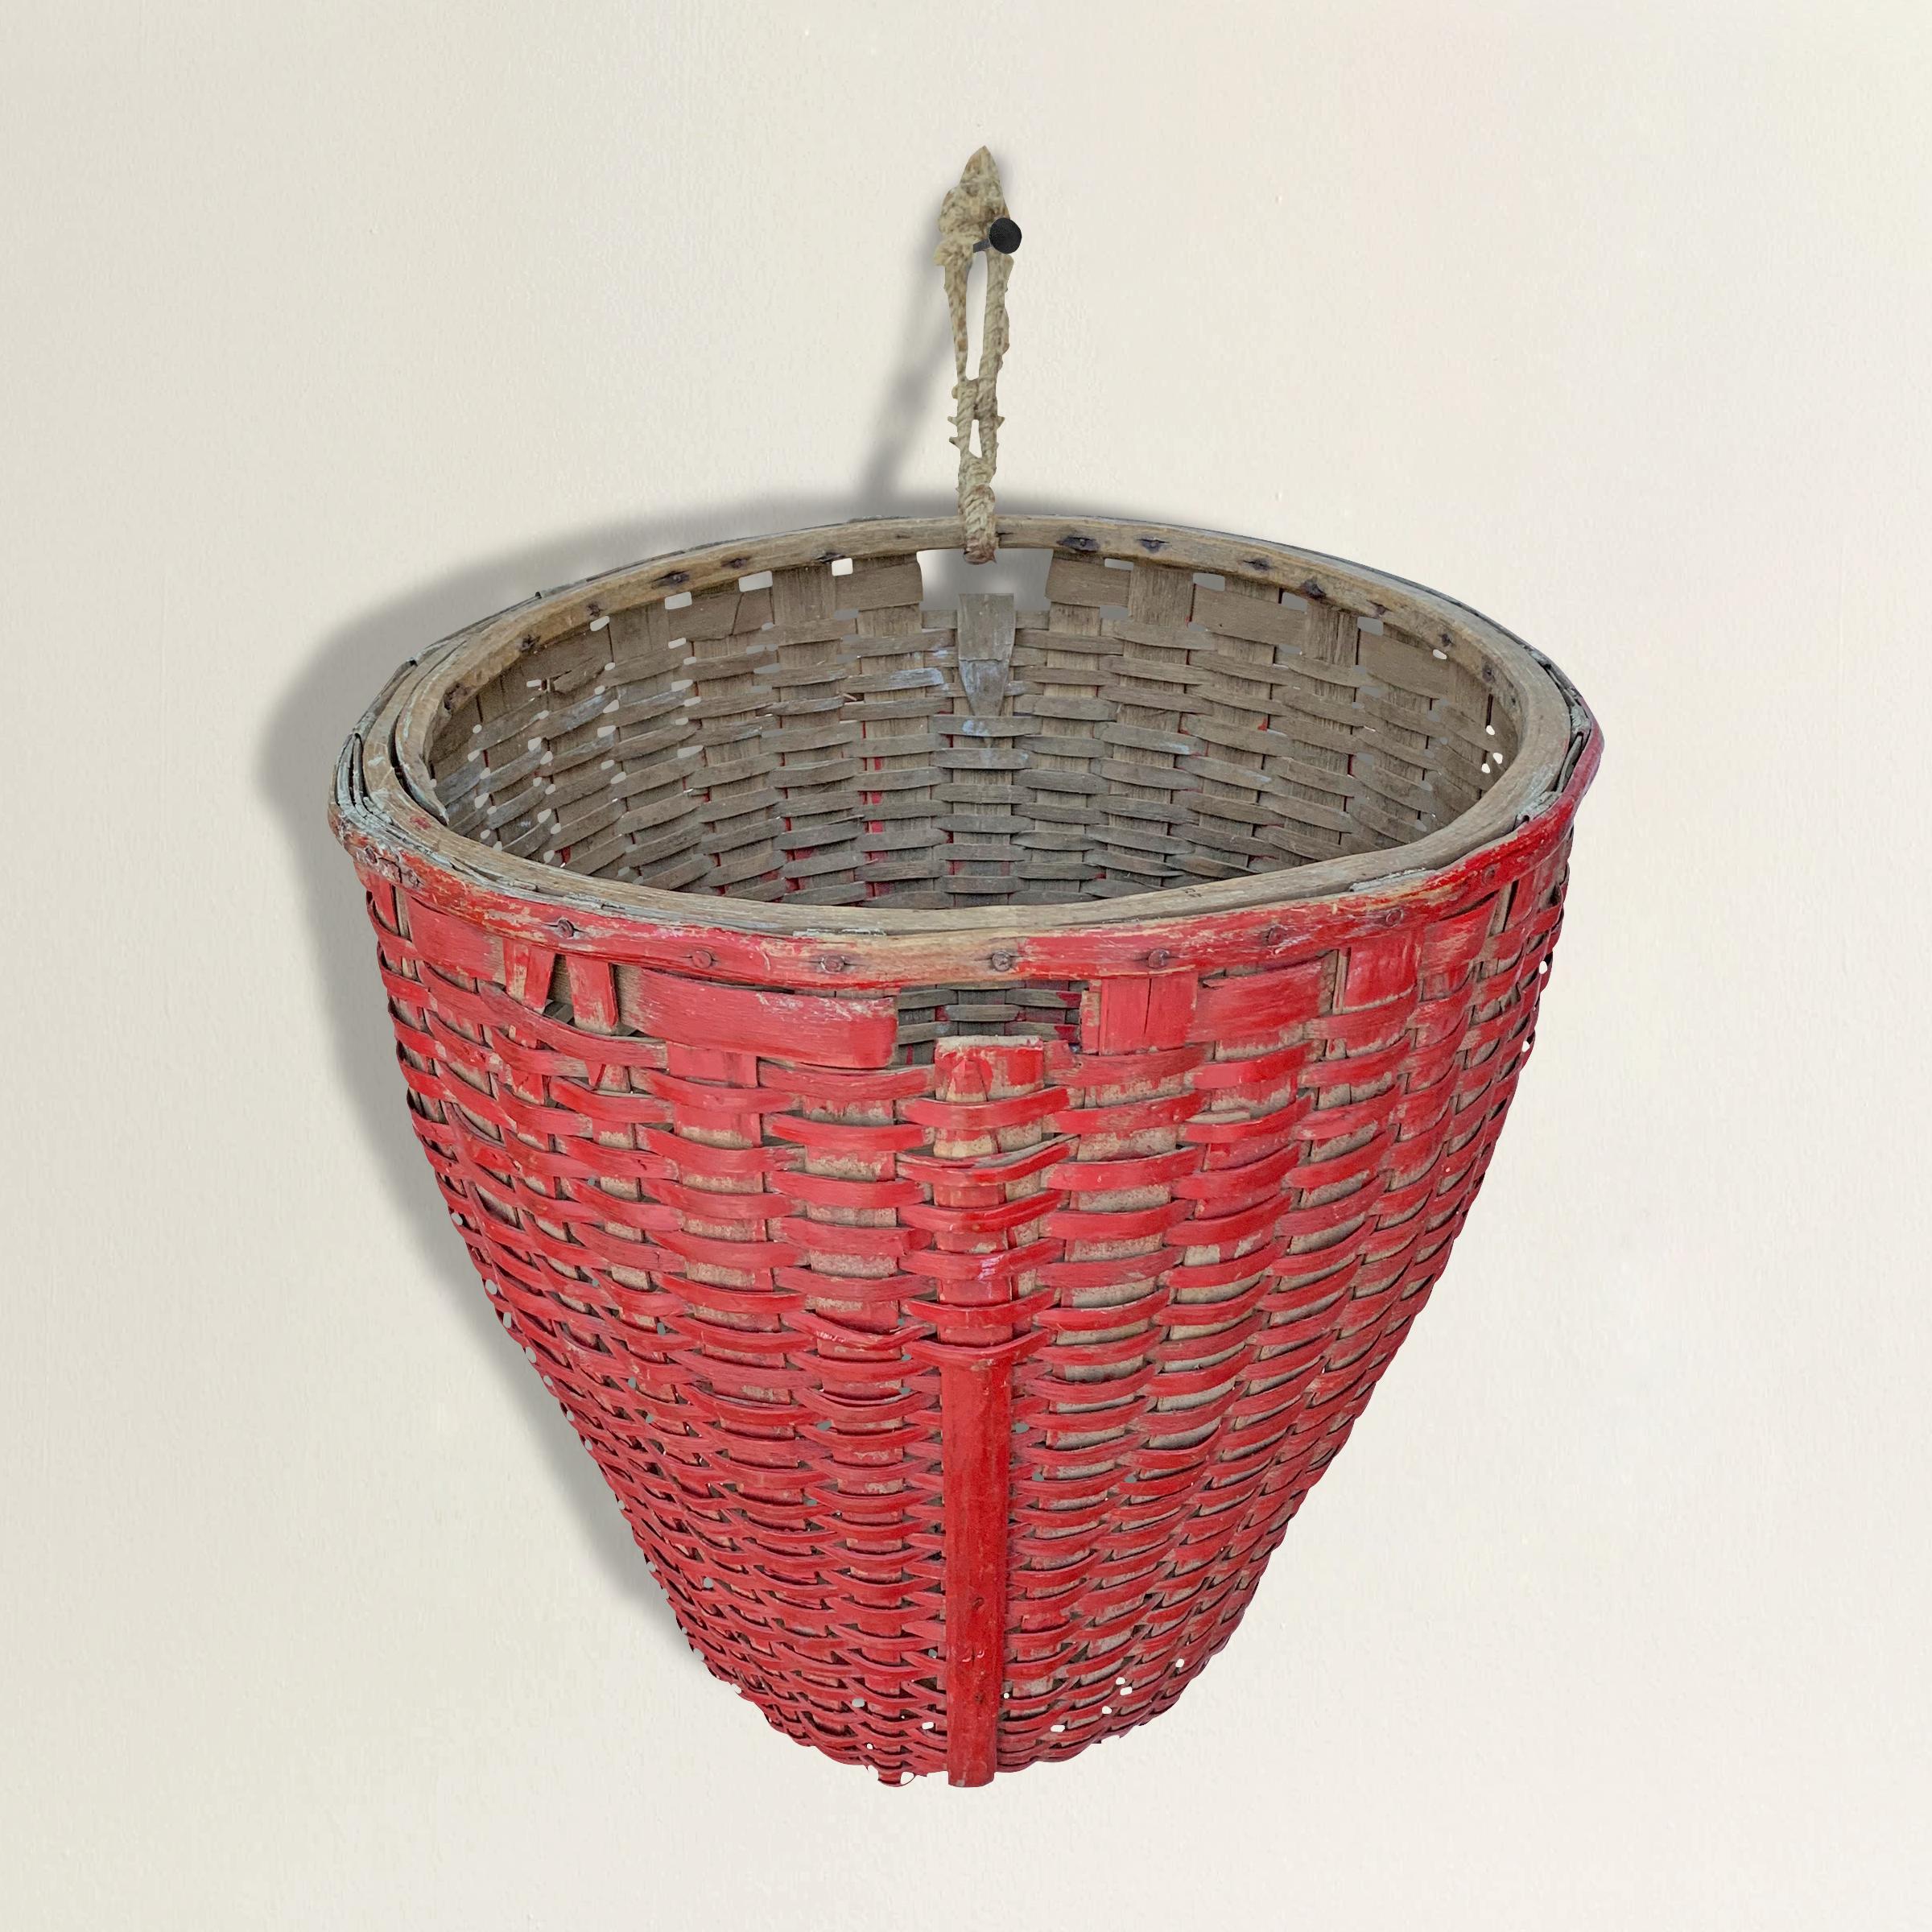 A fantastic 19th century American red painted oak splint round gathering basket with a tapered asymmetrical form making it perfect for hanging on a wall. Found in Western Massachusetts.